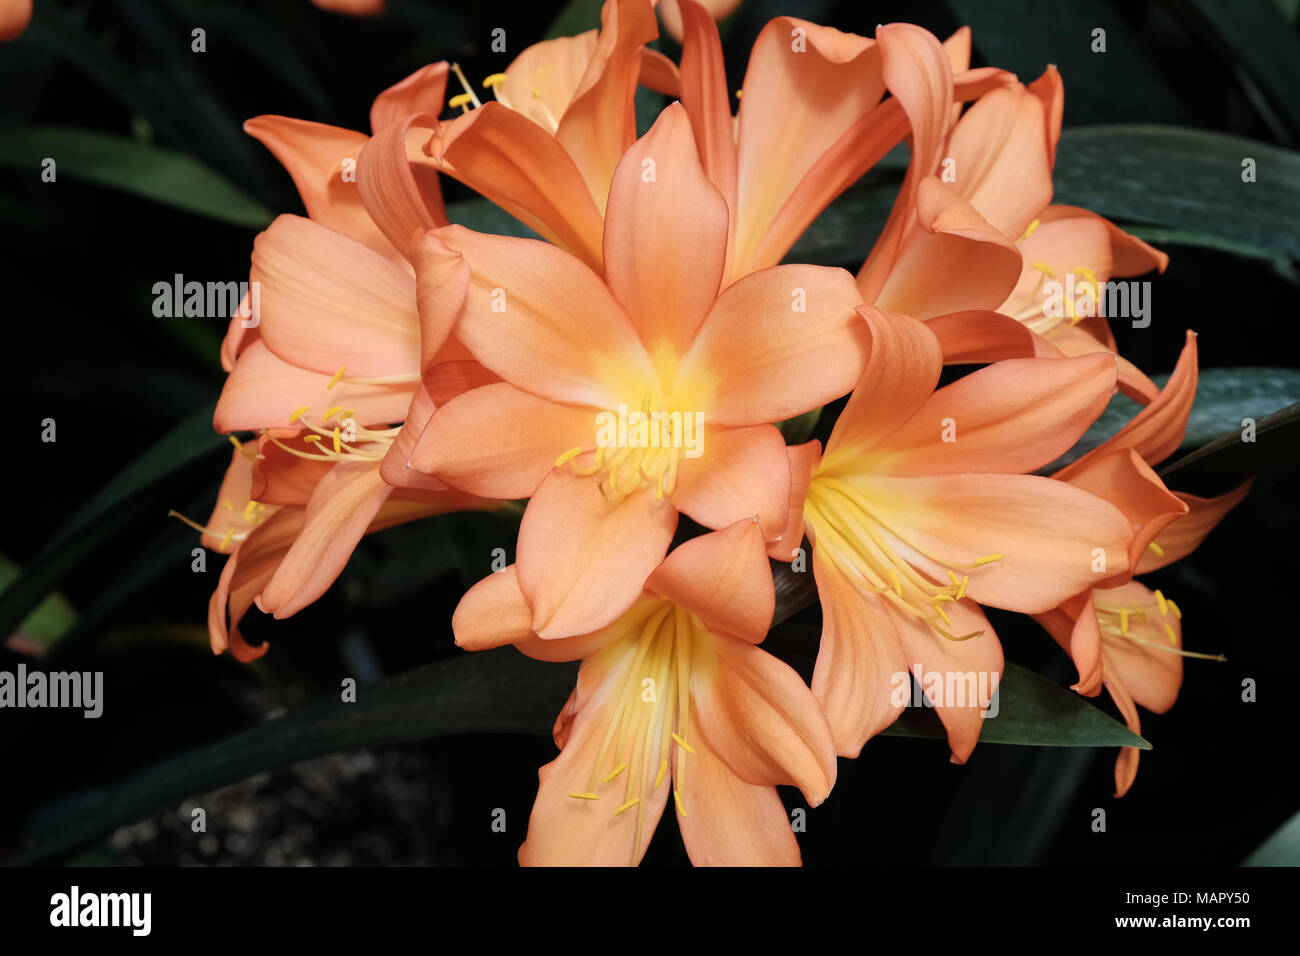 Cluster of peach lilies Stock Photo